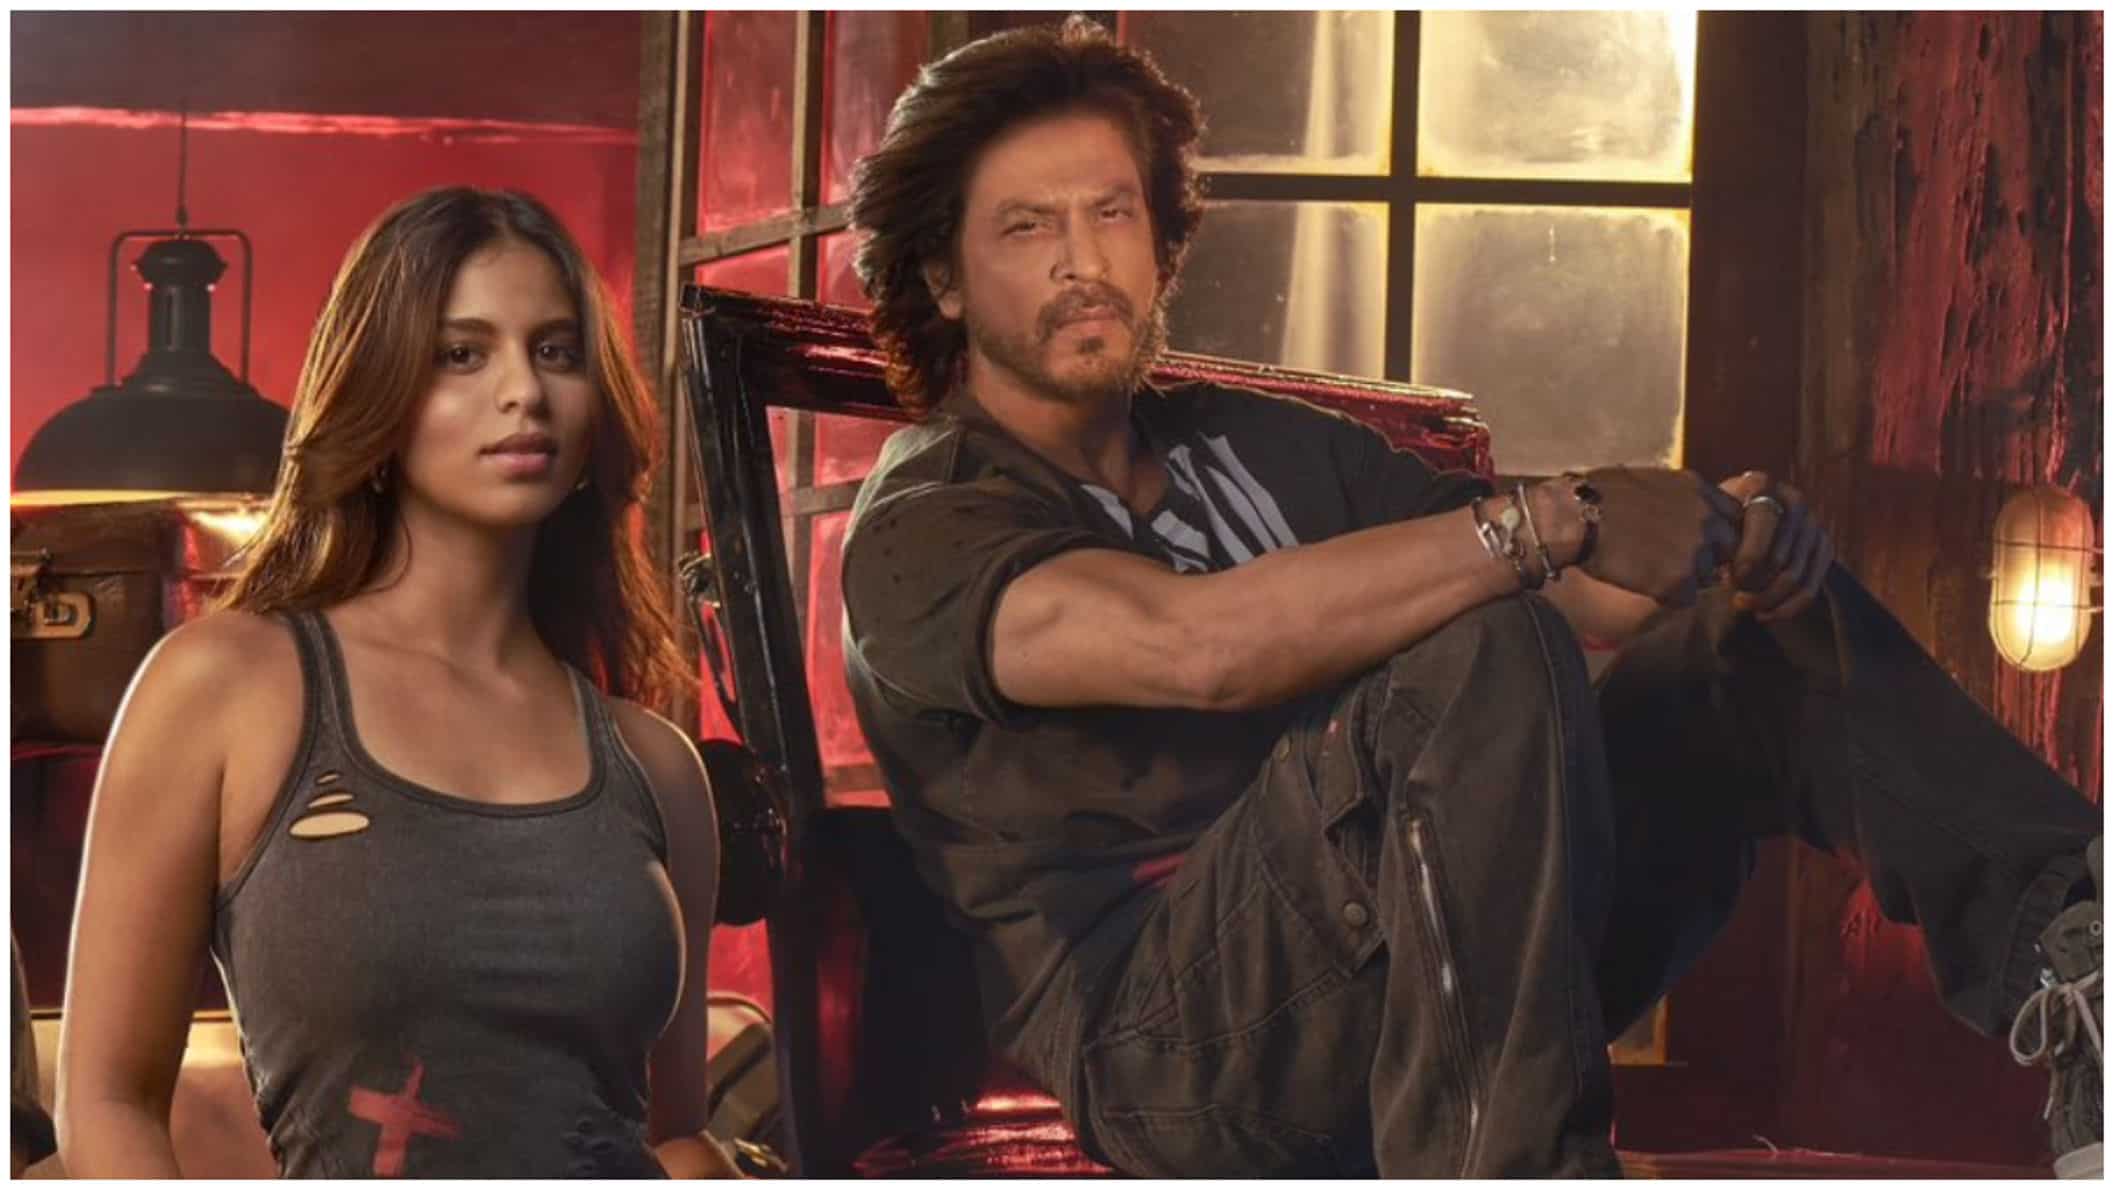 https://www.mobilemasala.com/movies/Shah-Rukh-Khan-to-invest-Rs-200-crores-in-Suhana-Khans-theatrical-debut-King-Heres-the-latest-buzz-i254390